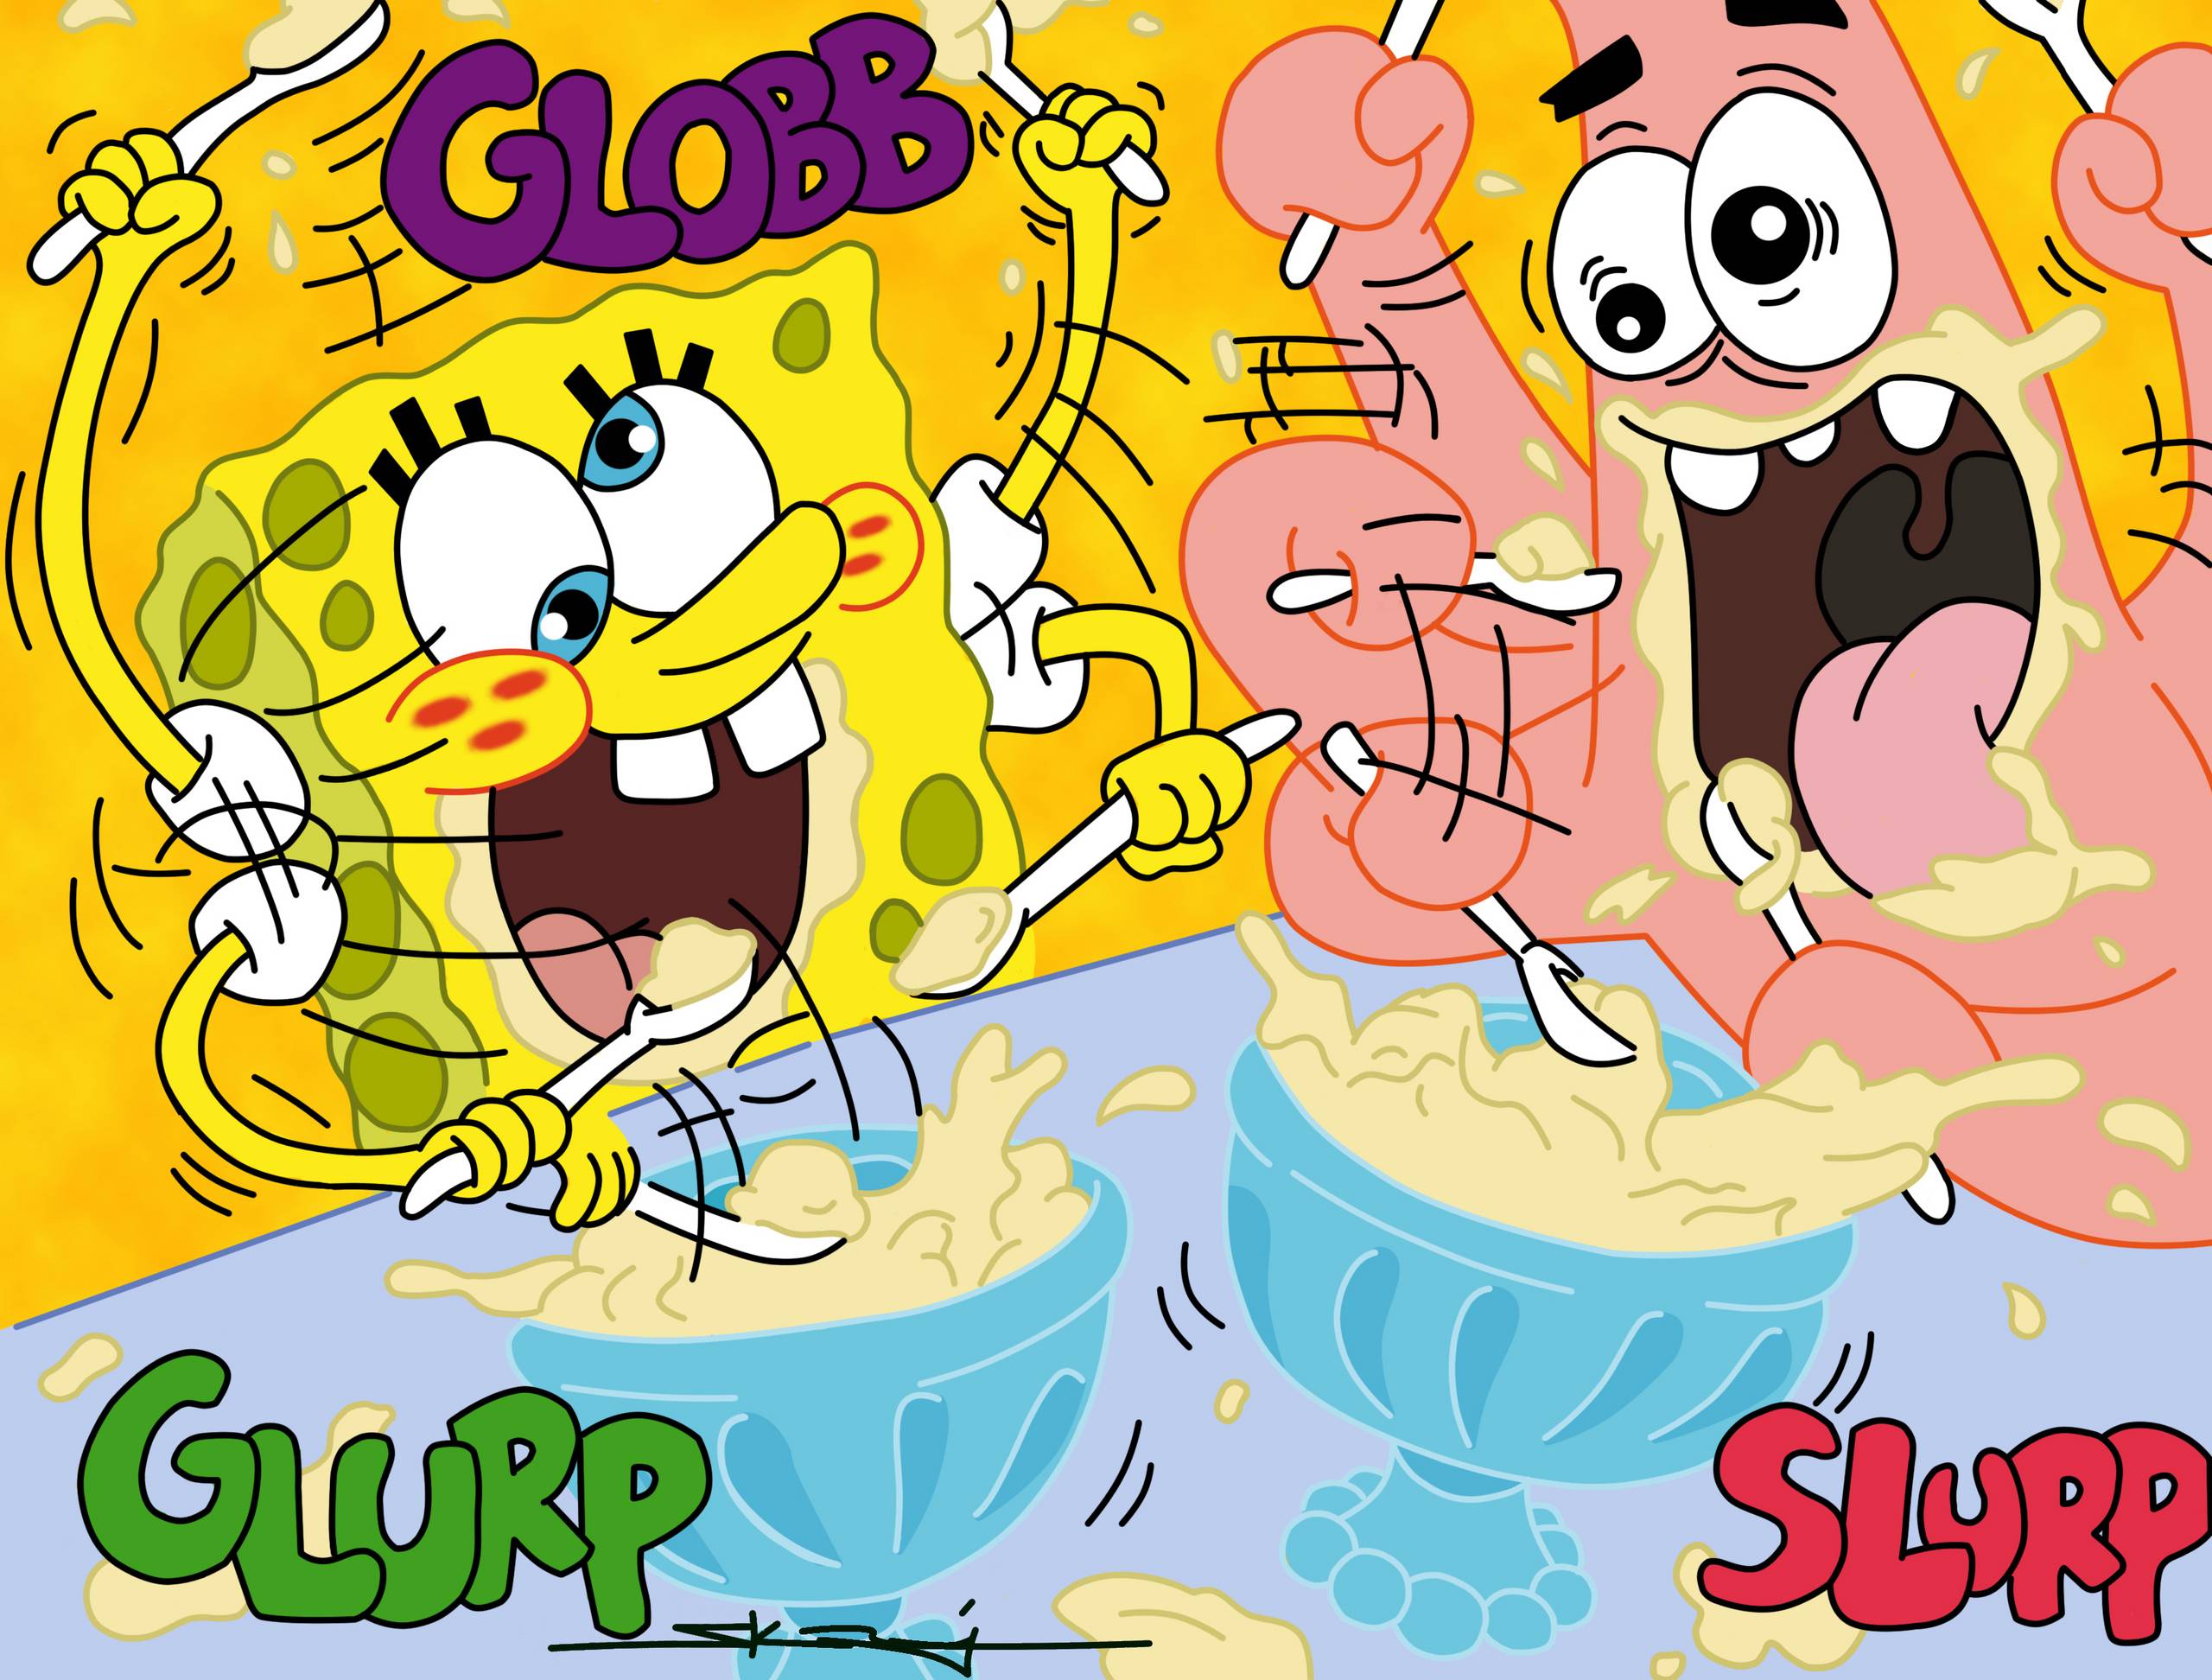 Spongebob and patrick wallpapers backgrounds